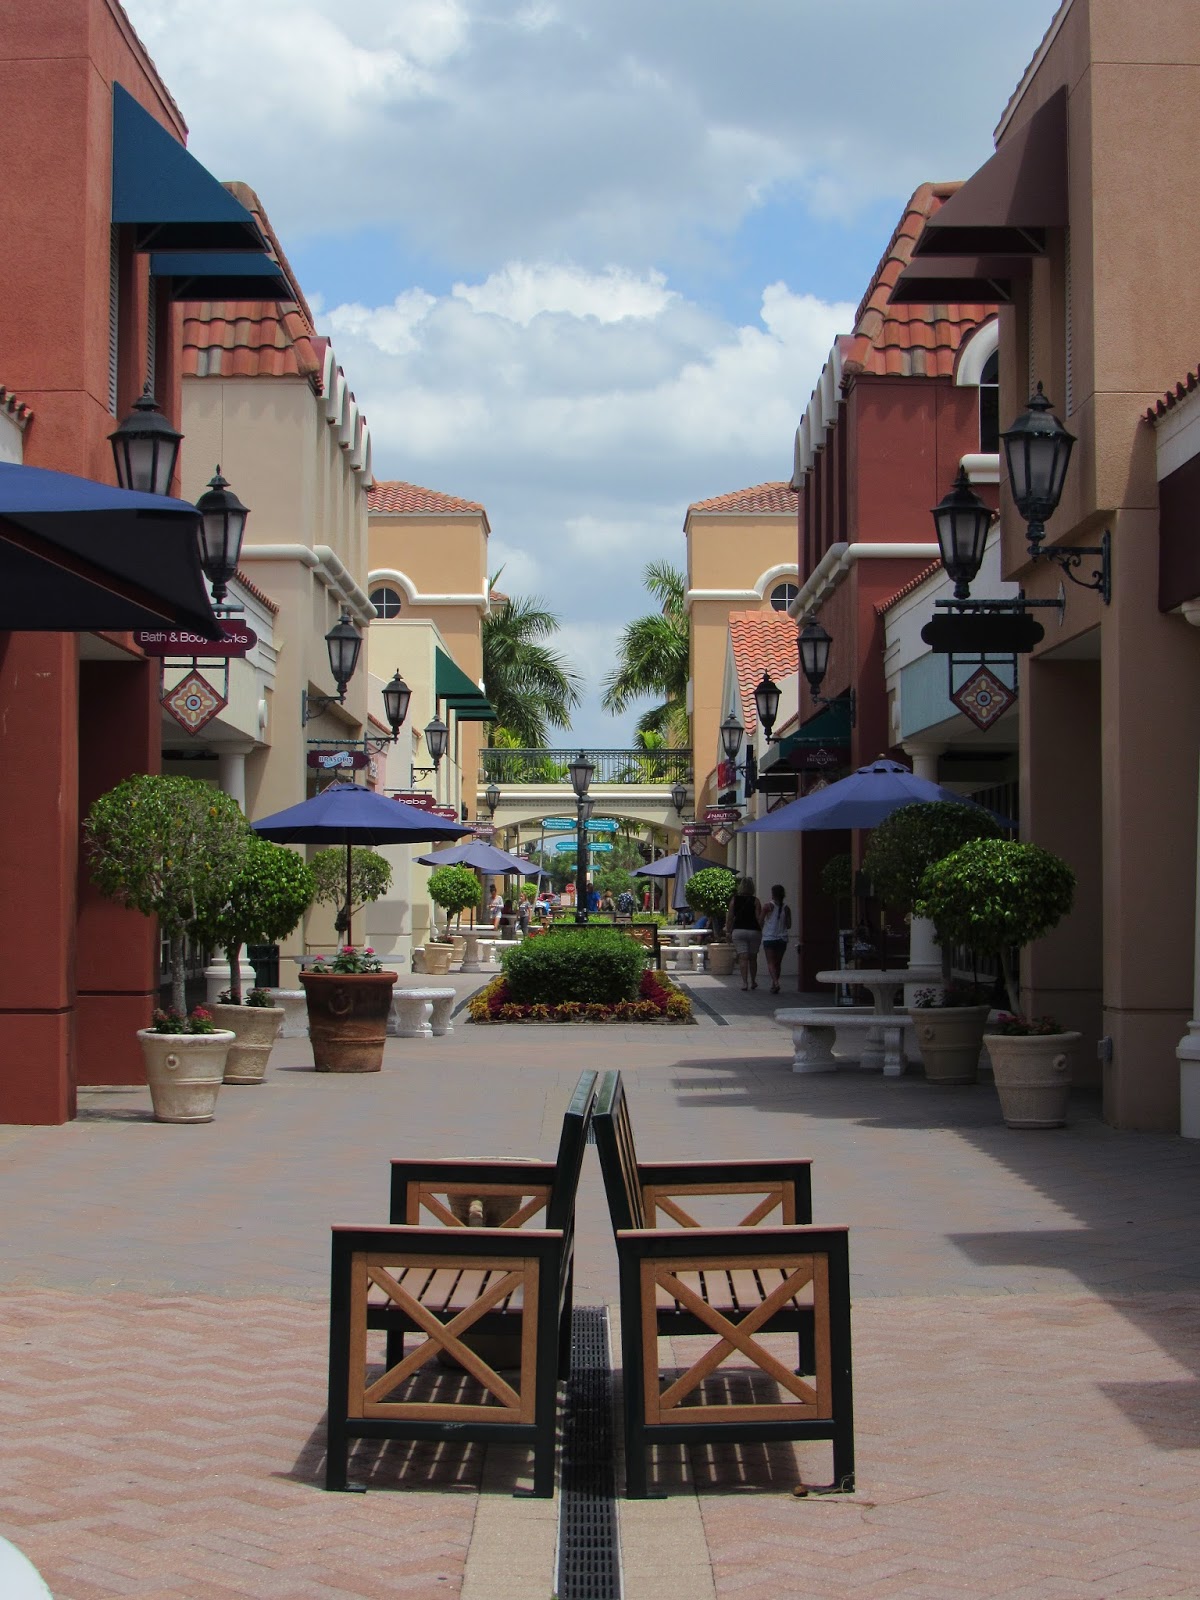 Livin' Life With Style : Successful Shopping Trip to Miromar Outlets in  Estero, Florida!